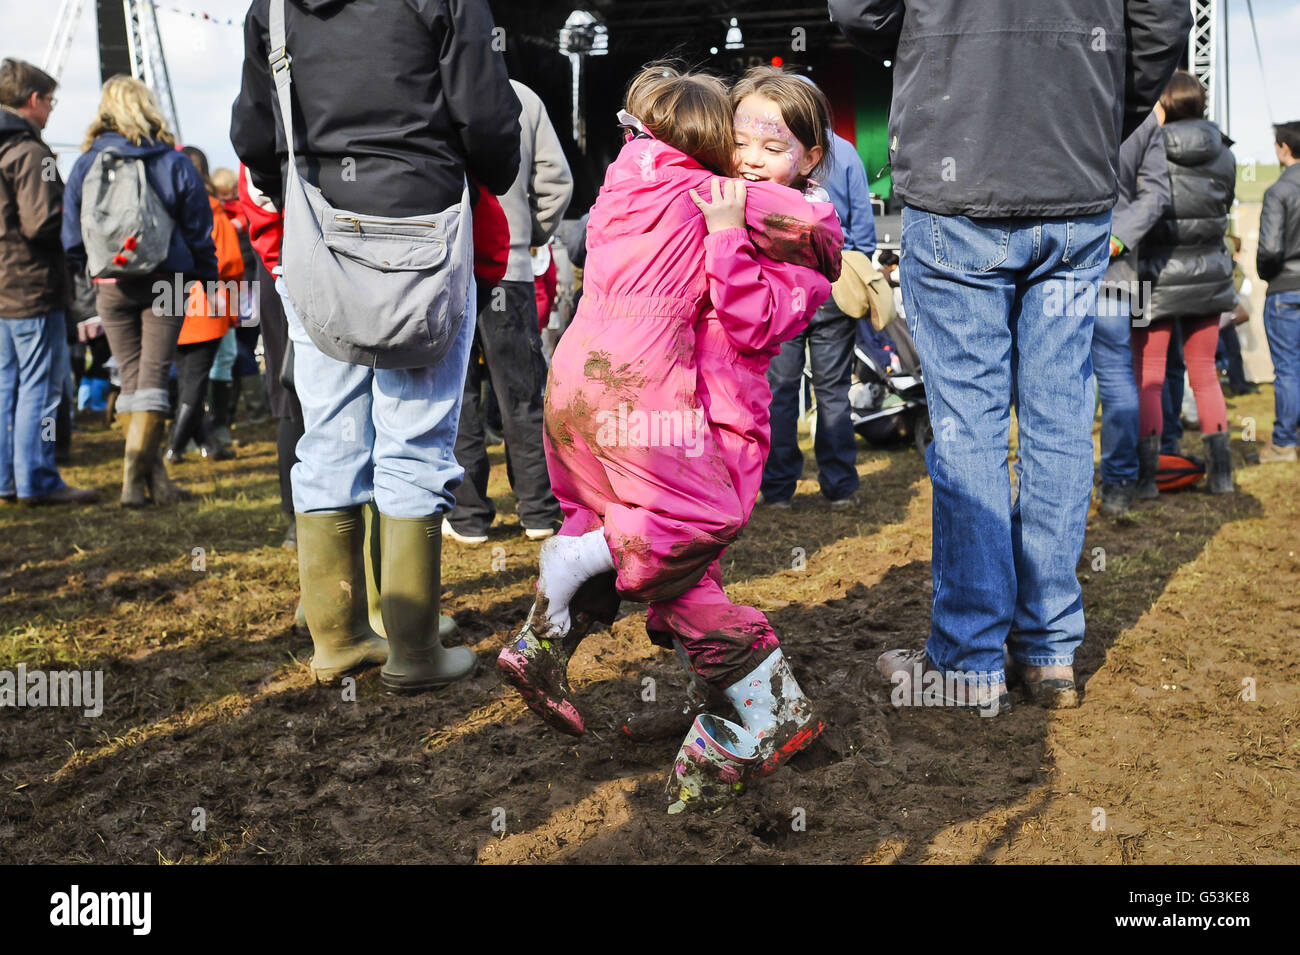 Florence (surname not given), 8, rescues her little sister Charlotte, 6, from Hampshire, as she looses her Wellington boot in the sticky mud in the crowd at One Fest music festival, near Marlborough in Wiltshire. Stock Photo